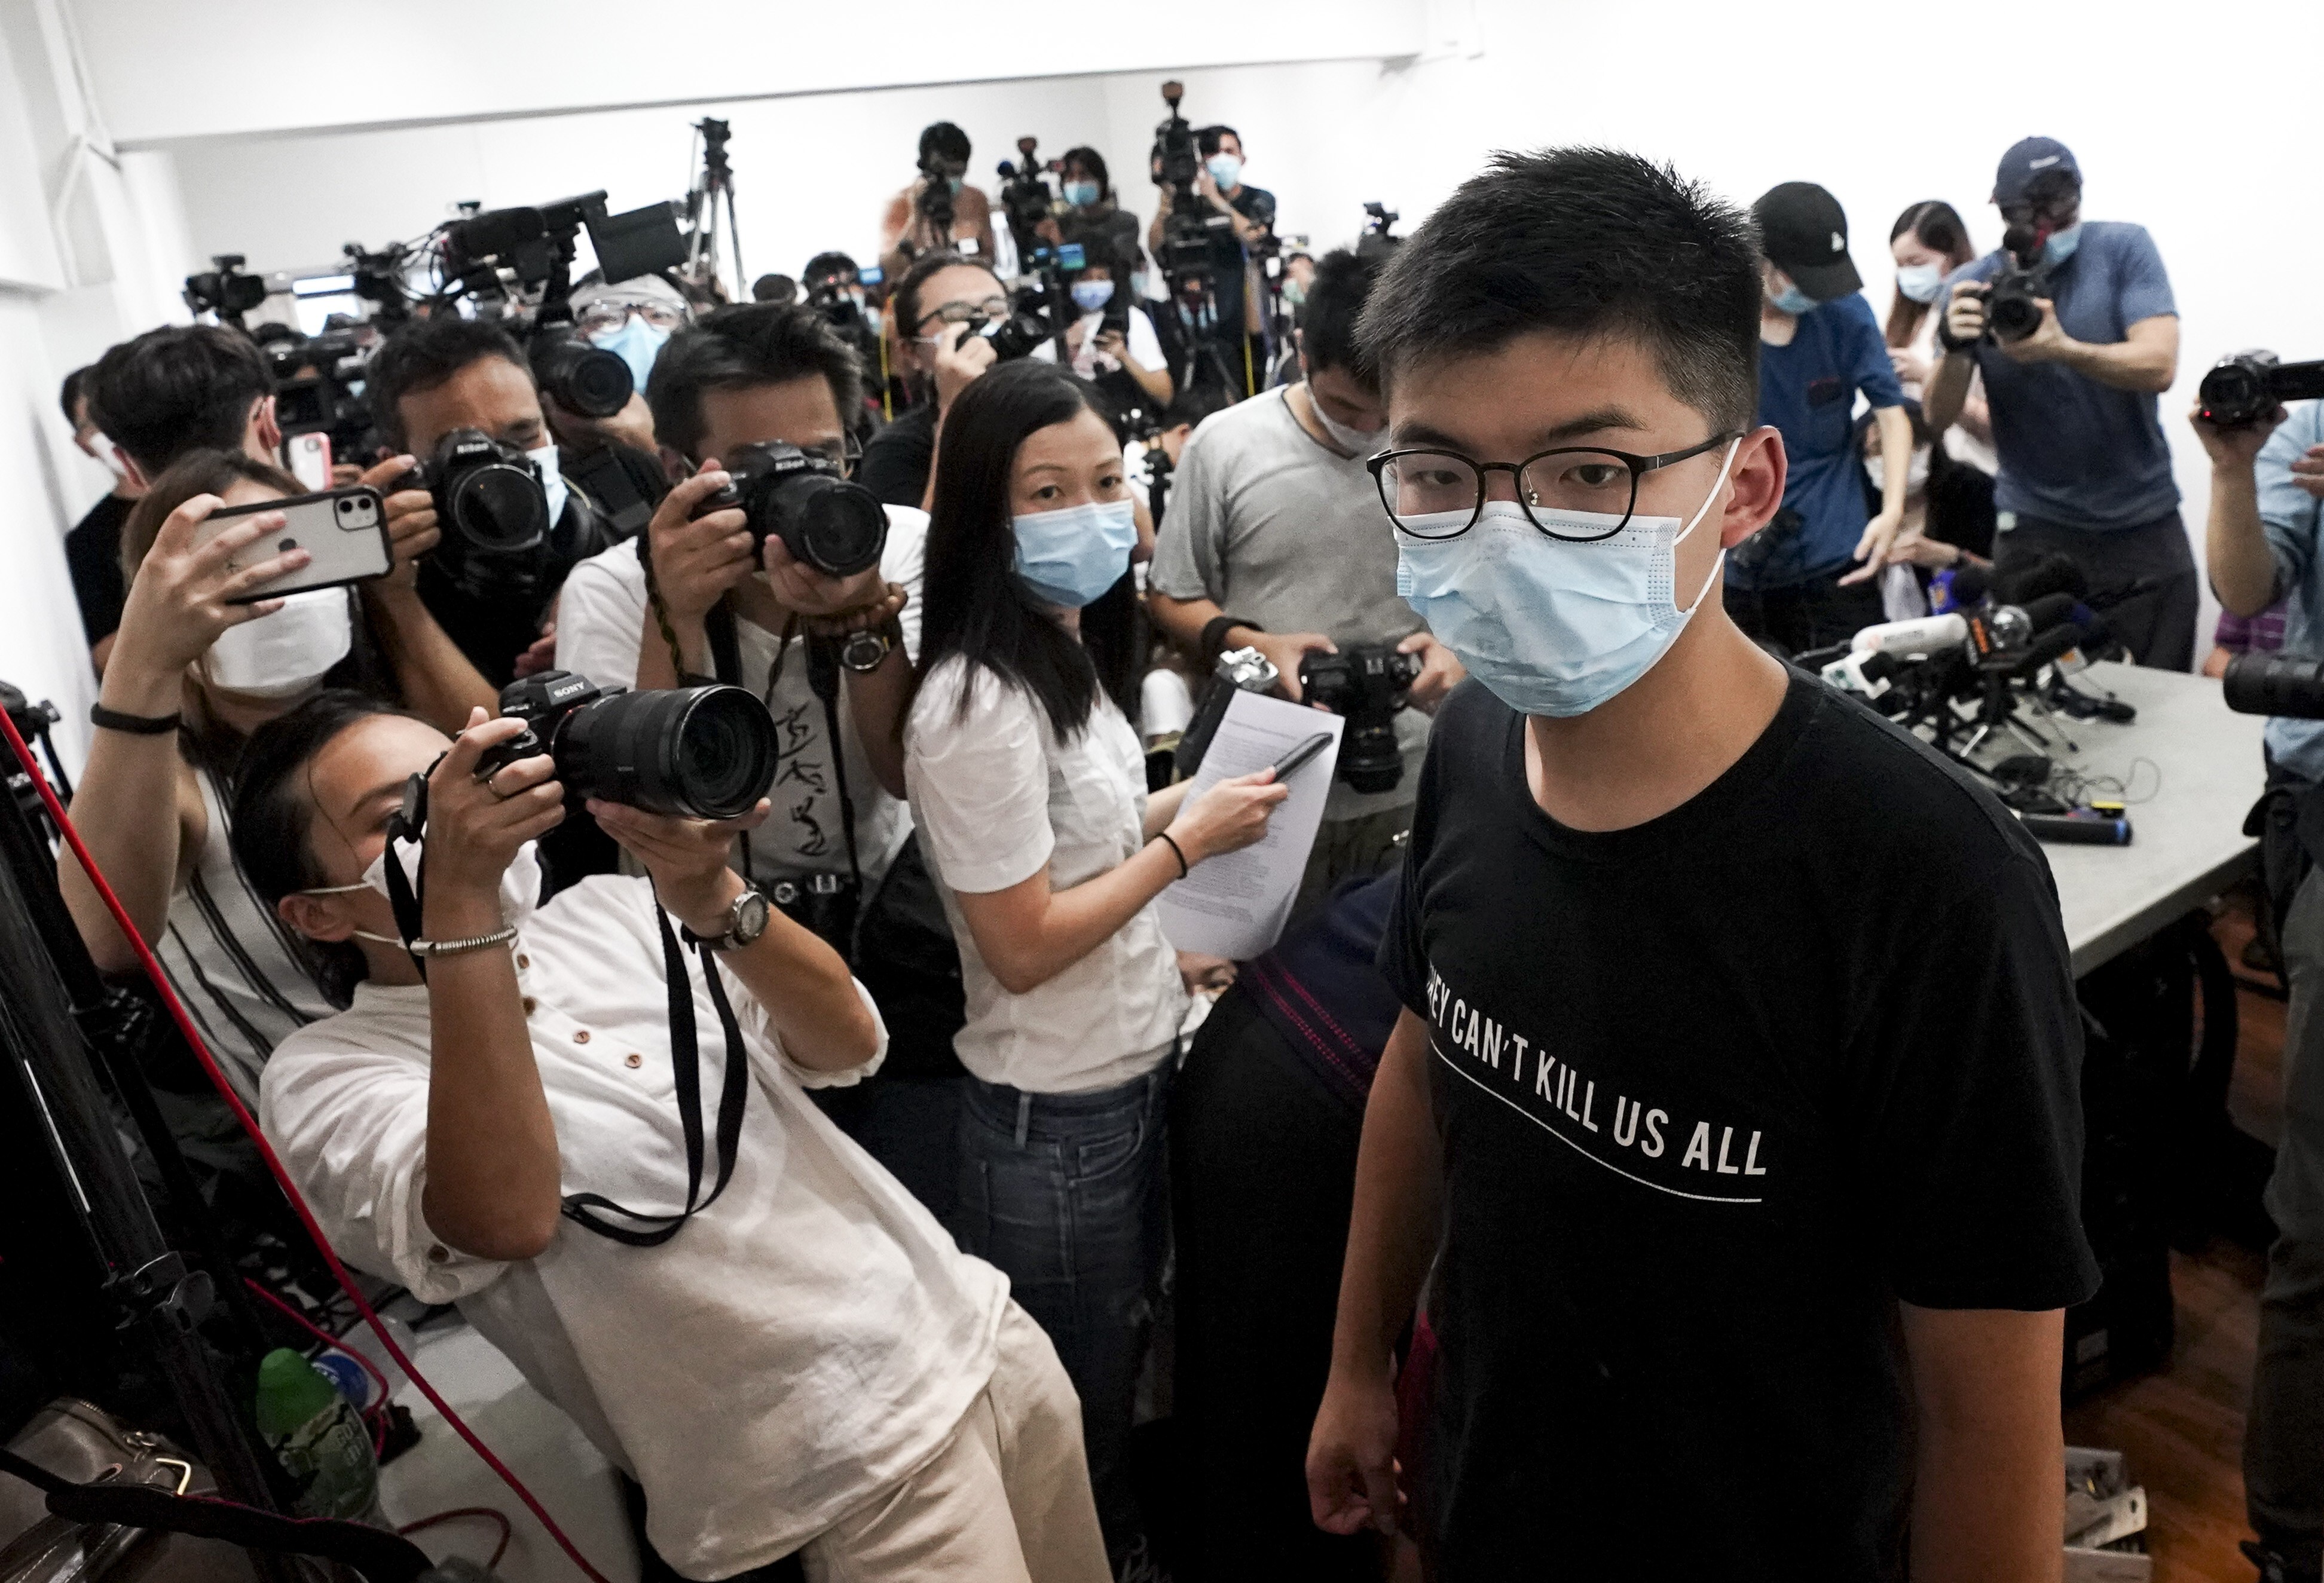 Hong Kong opposition activist Joshua Wong met with reporters on Friday to discuss his disqualification from the city’s Legislative Council elections. Photo: Felix Wong